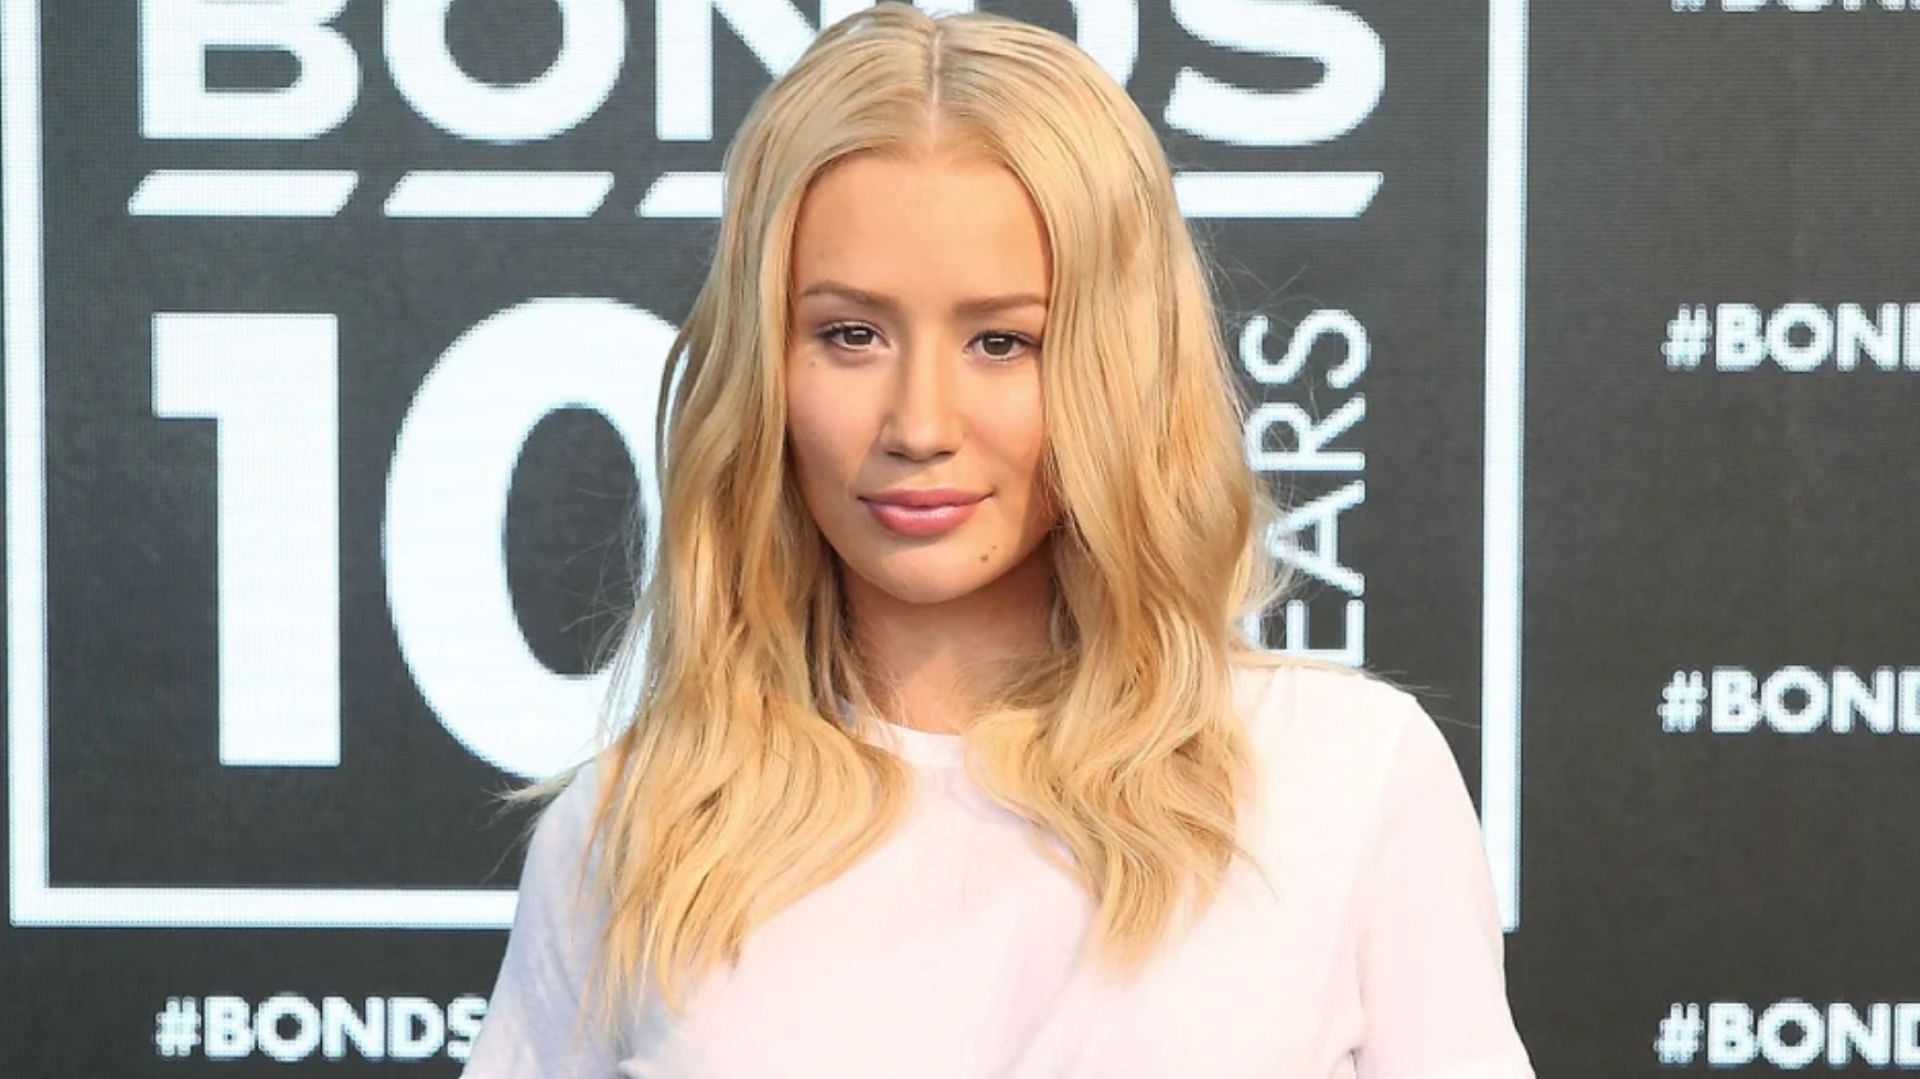 Iggy Azalea injured her neck while on tour. (Image via Brendon Thorne / Getty Images)